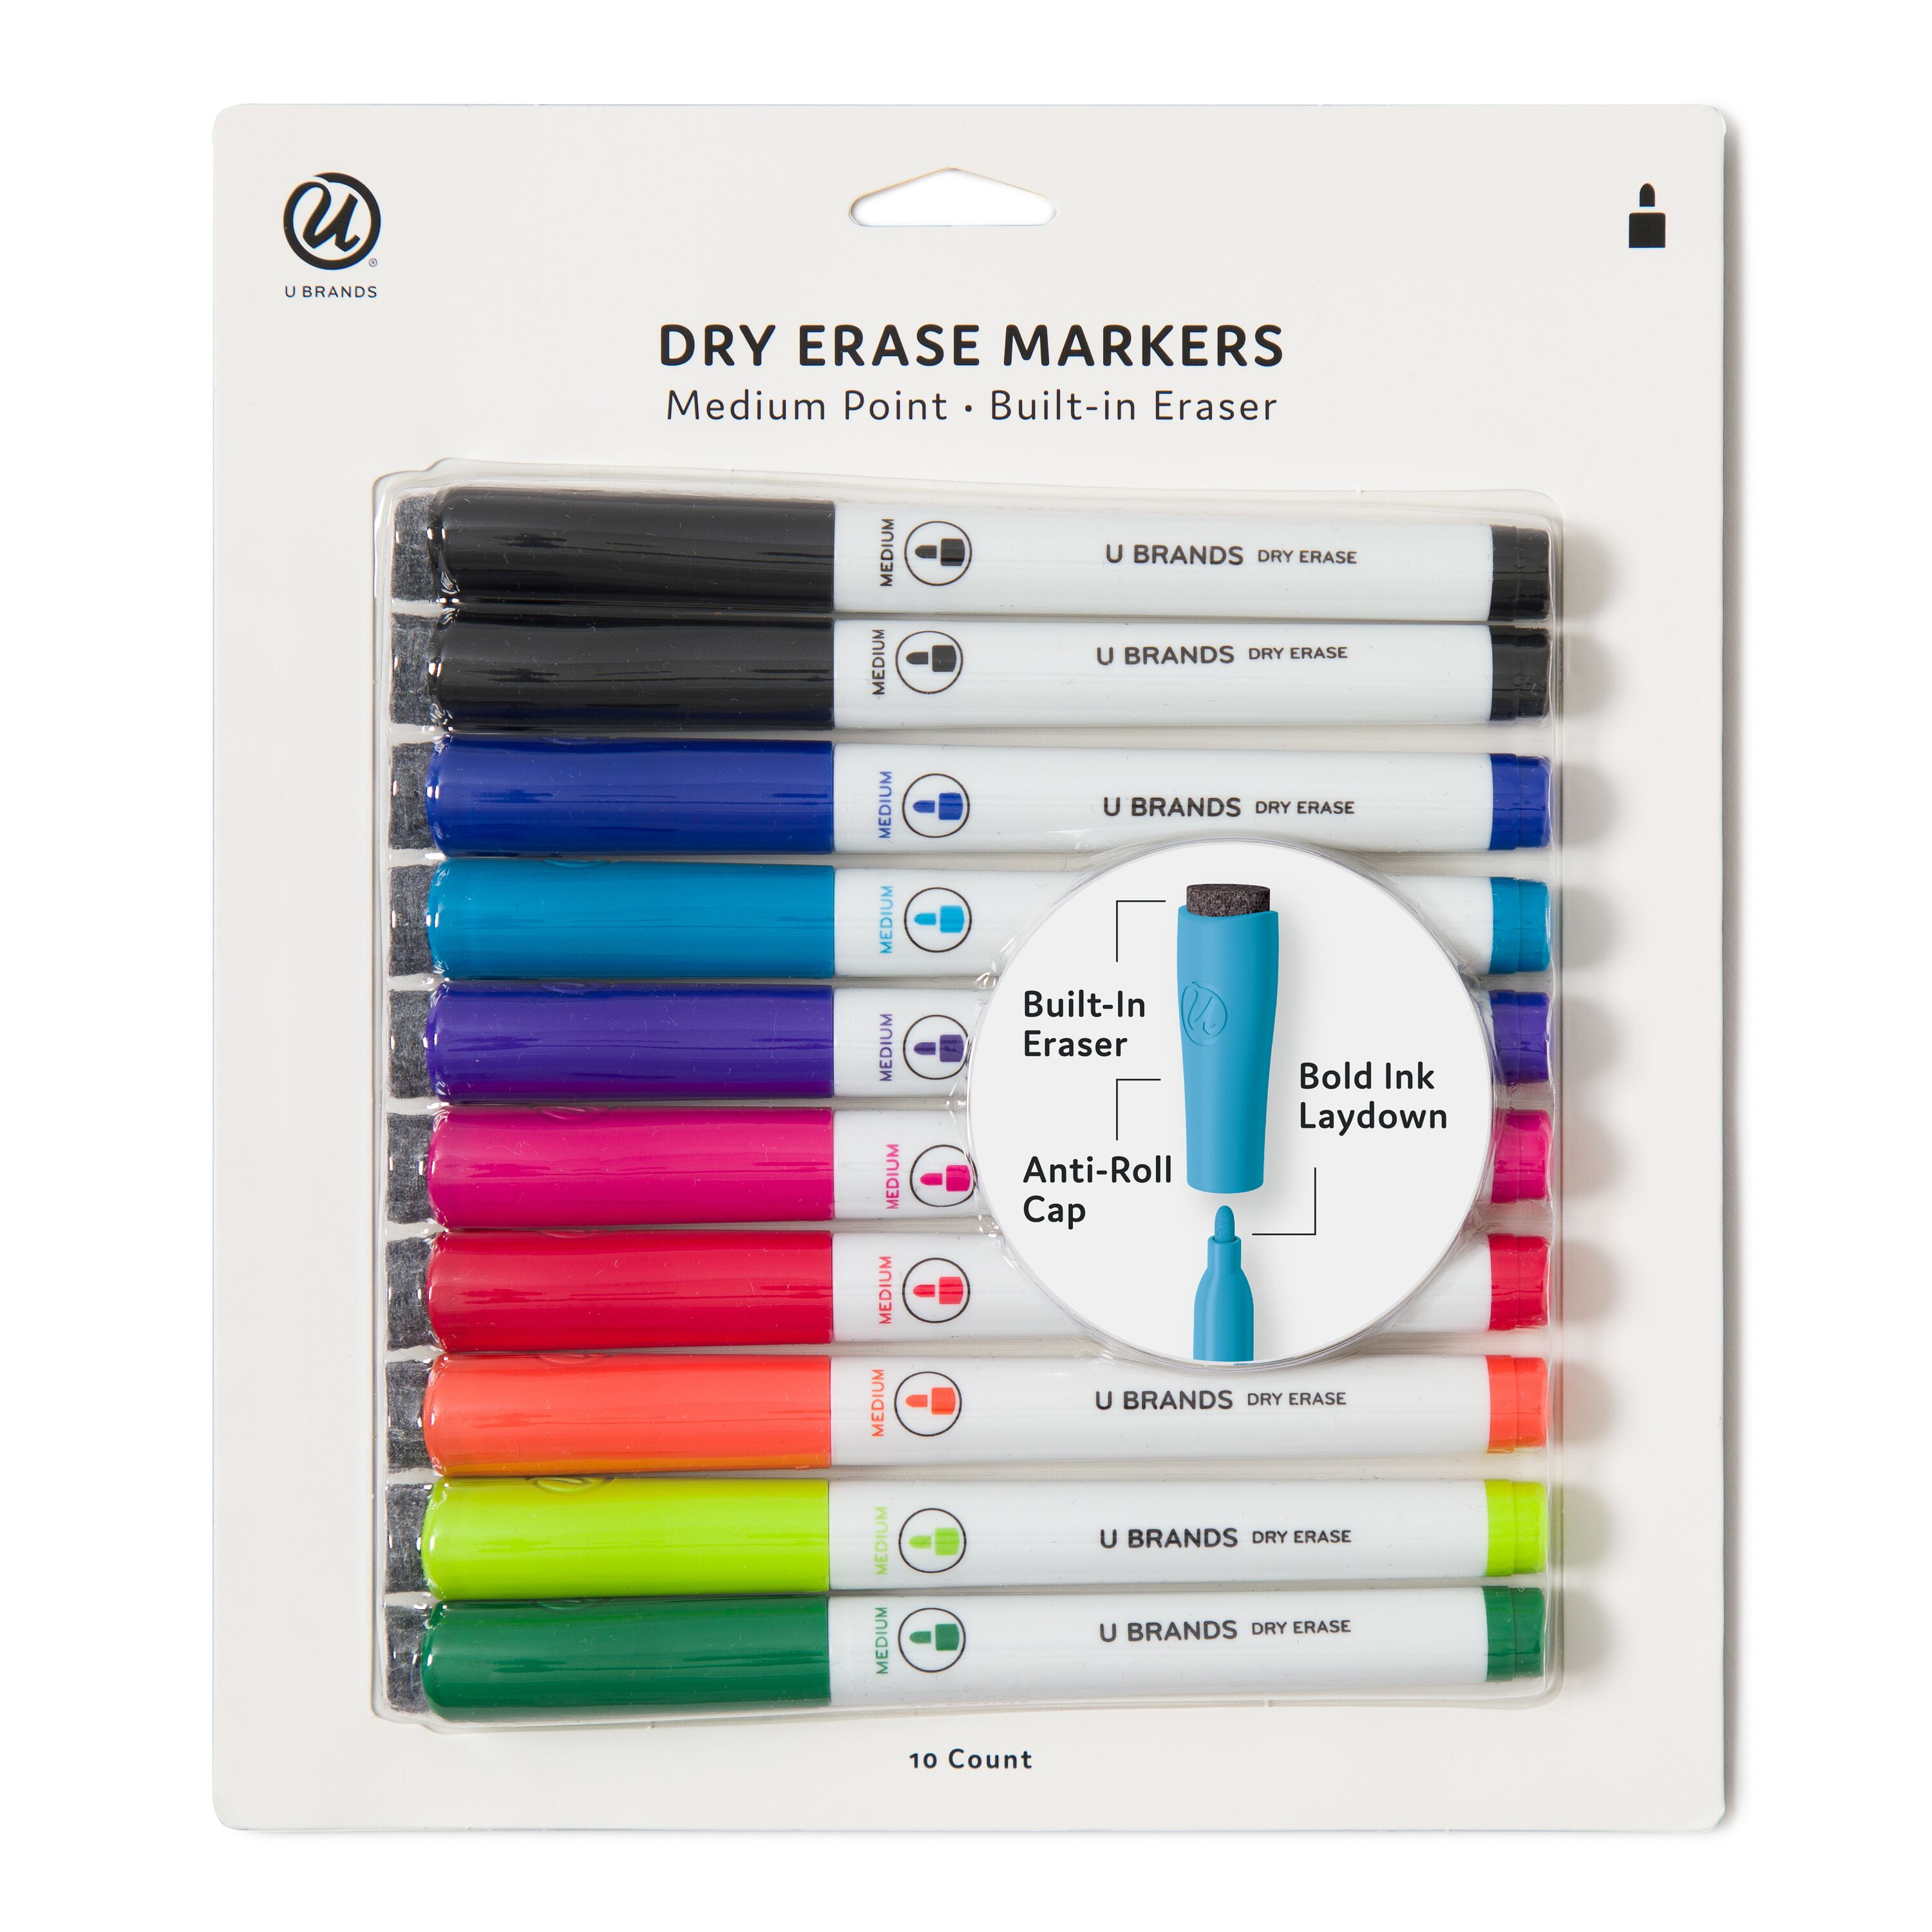 Dry Erase Markers – Loud Dawn